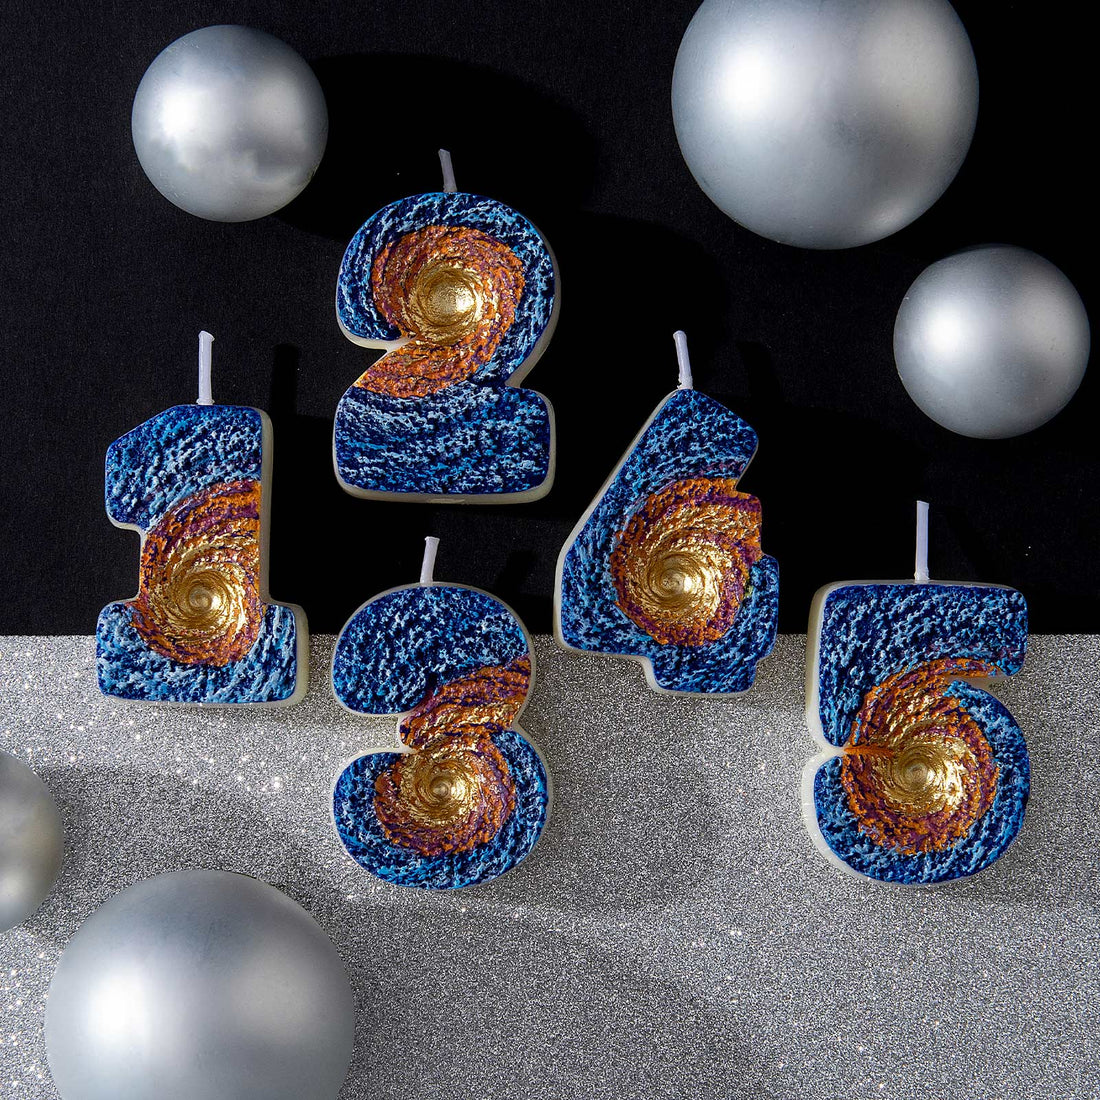 Galaxy Wormhole Number Candle from Southlake Gifts number 1, 2, 3, 4, 5